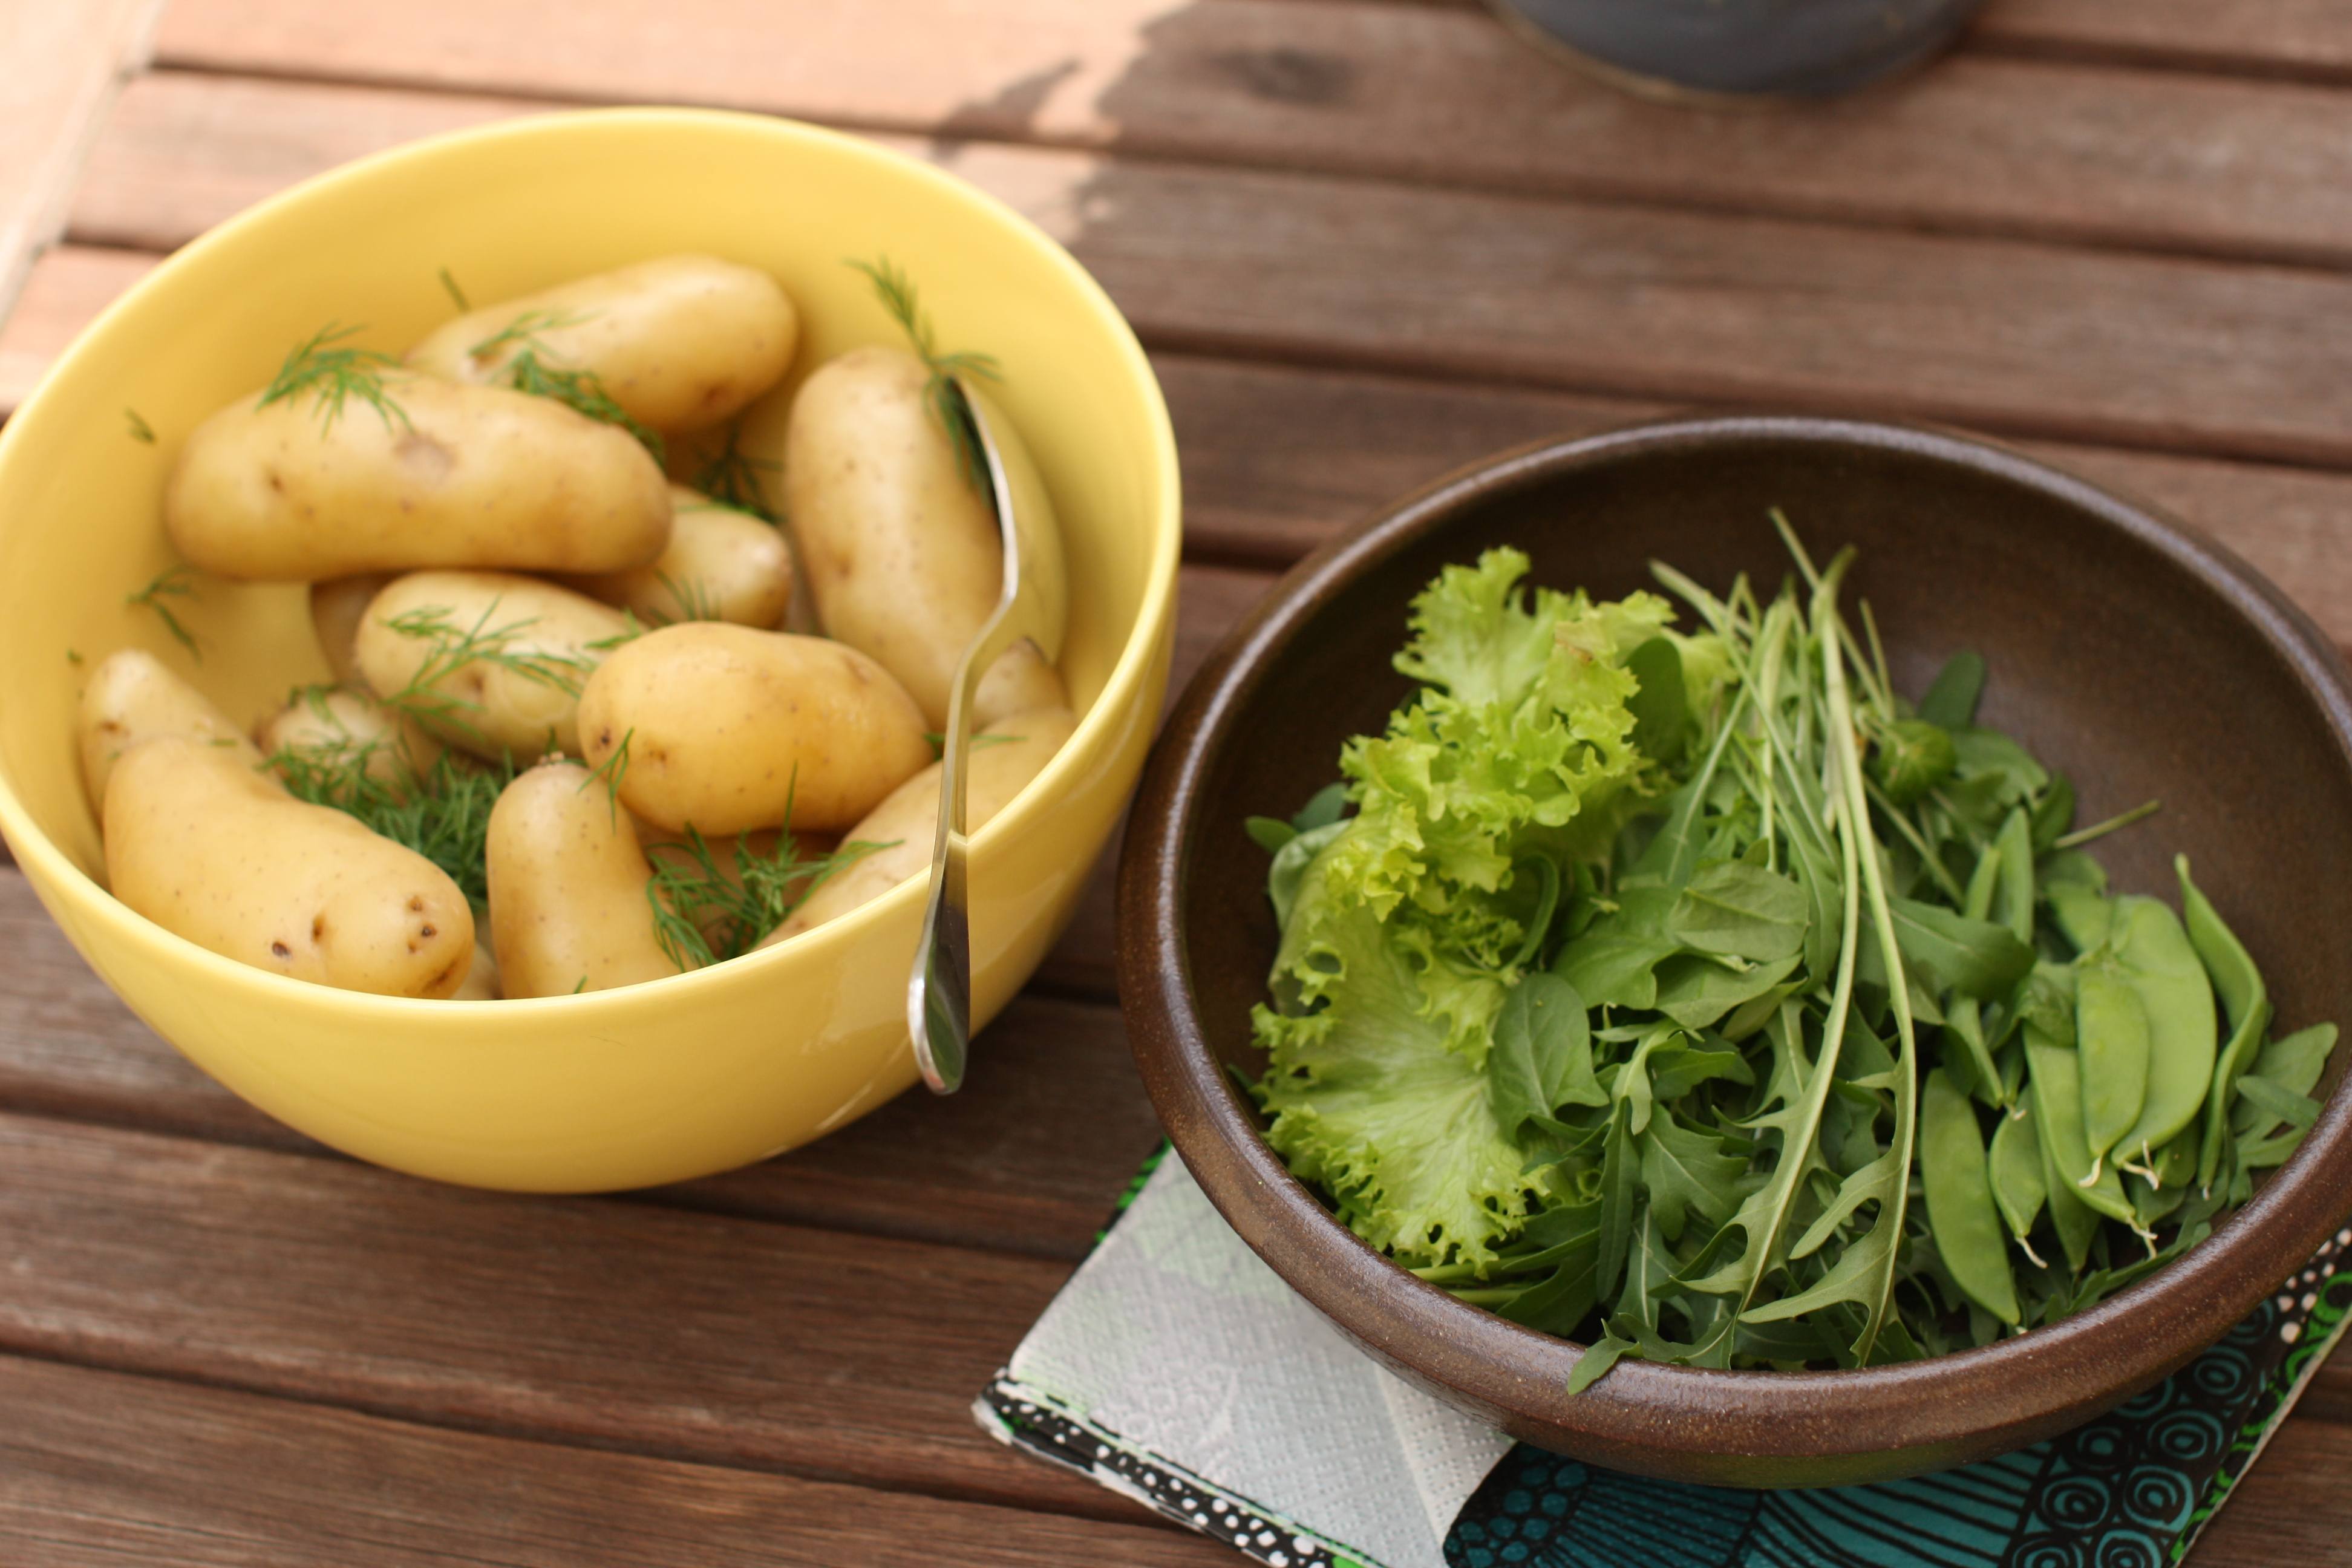 Why You Need To Reduce Potassium Intake When You Have Kidney Problems